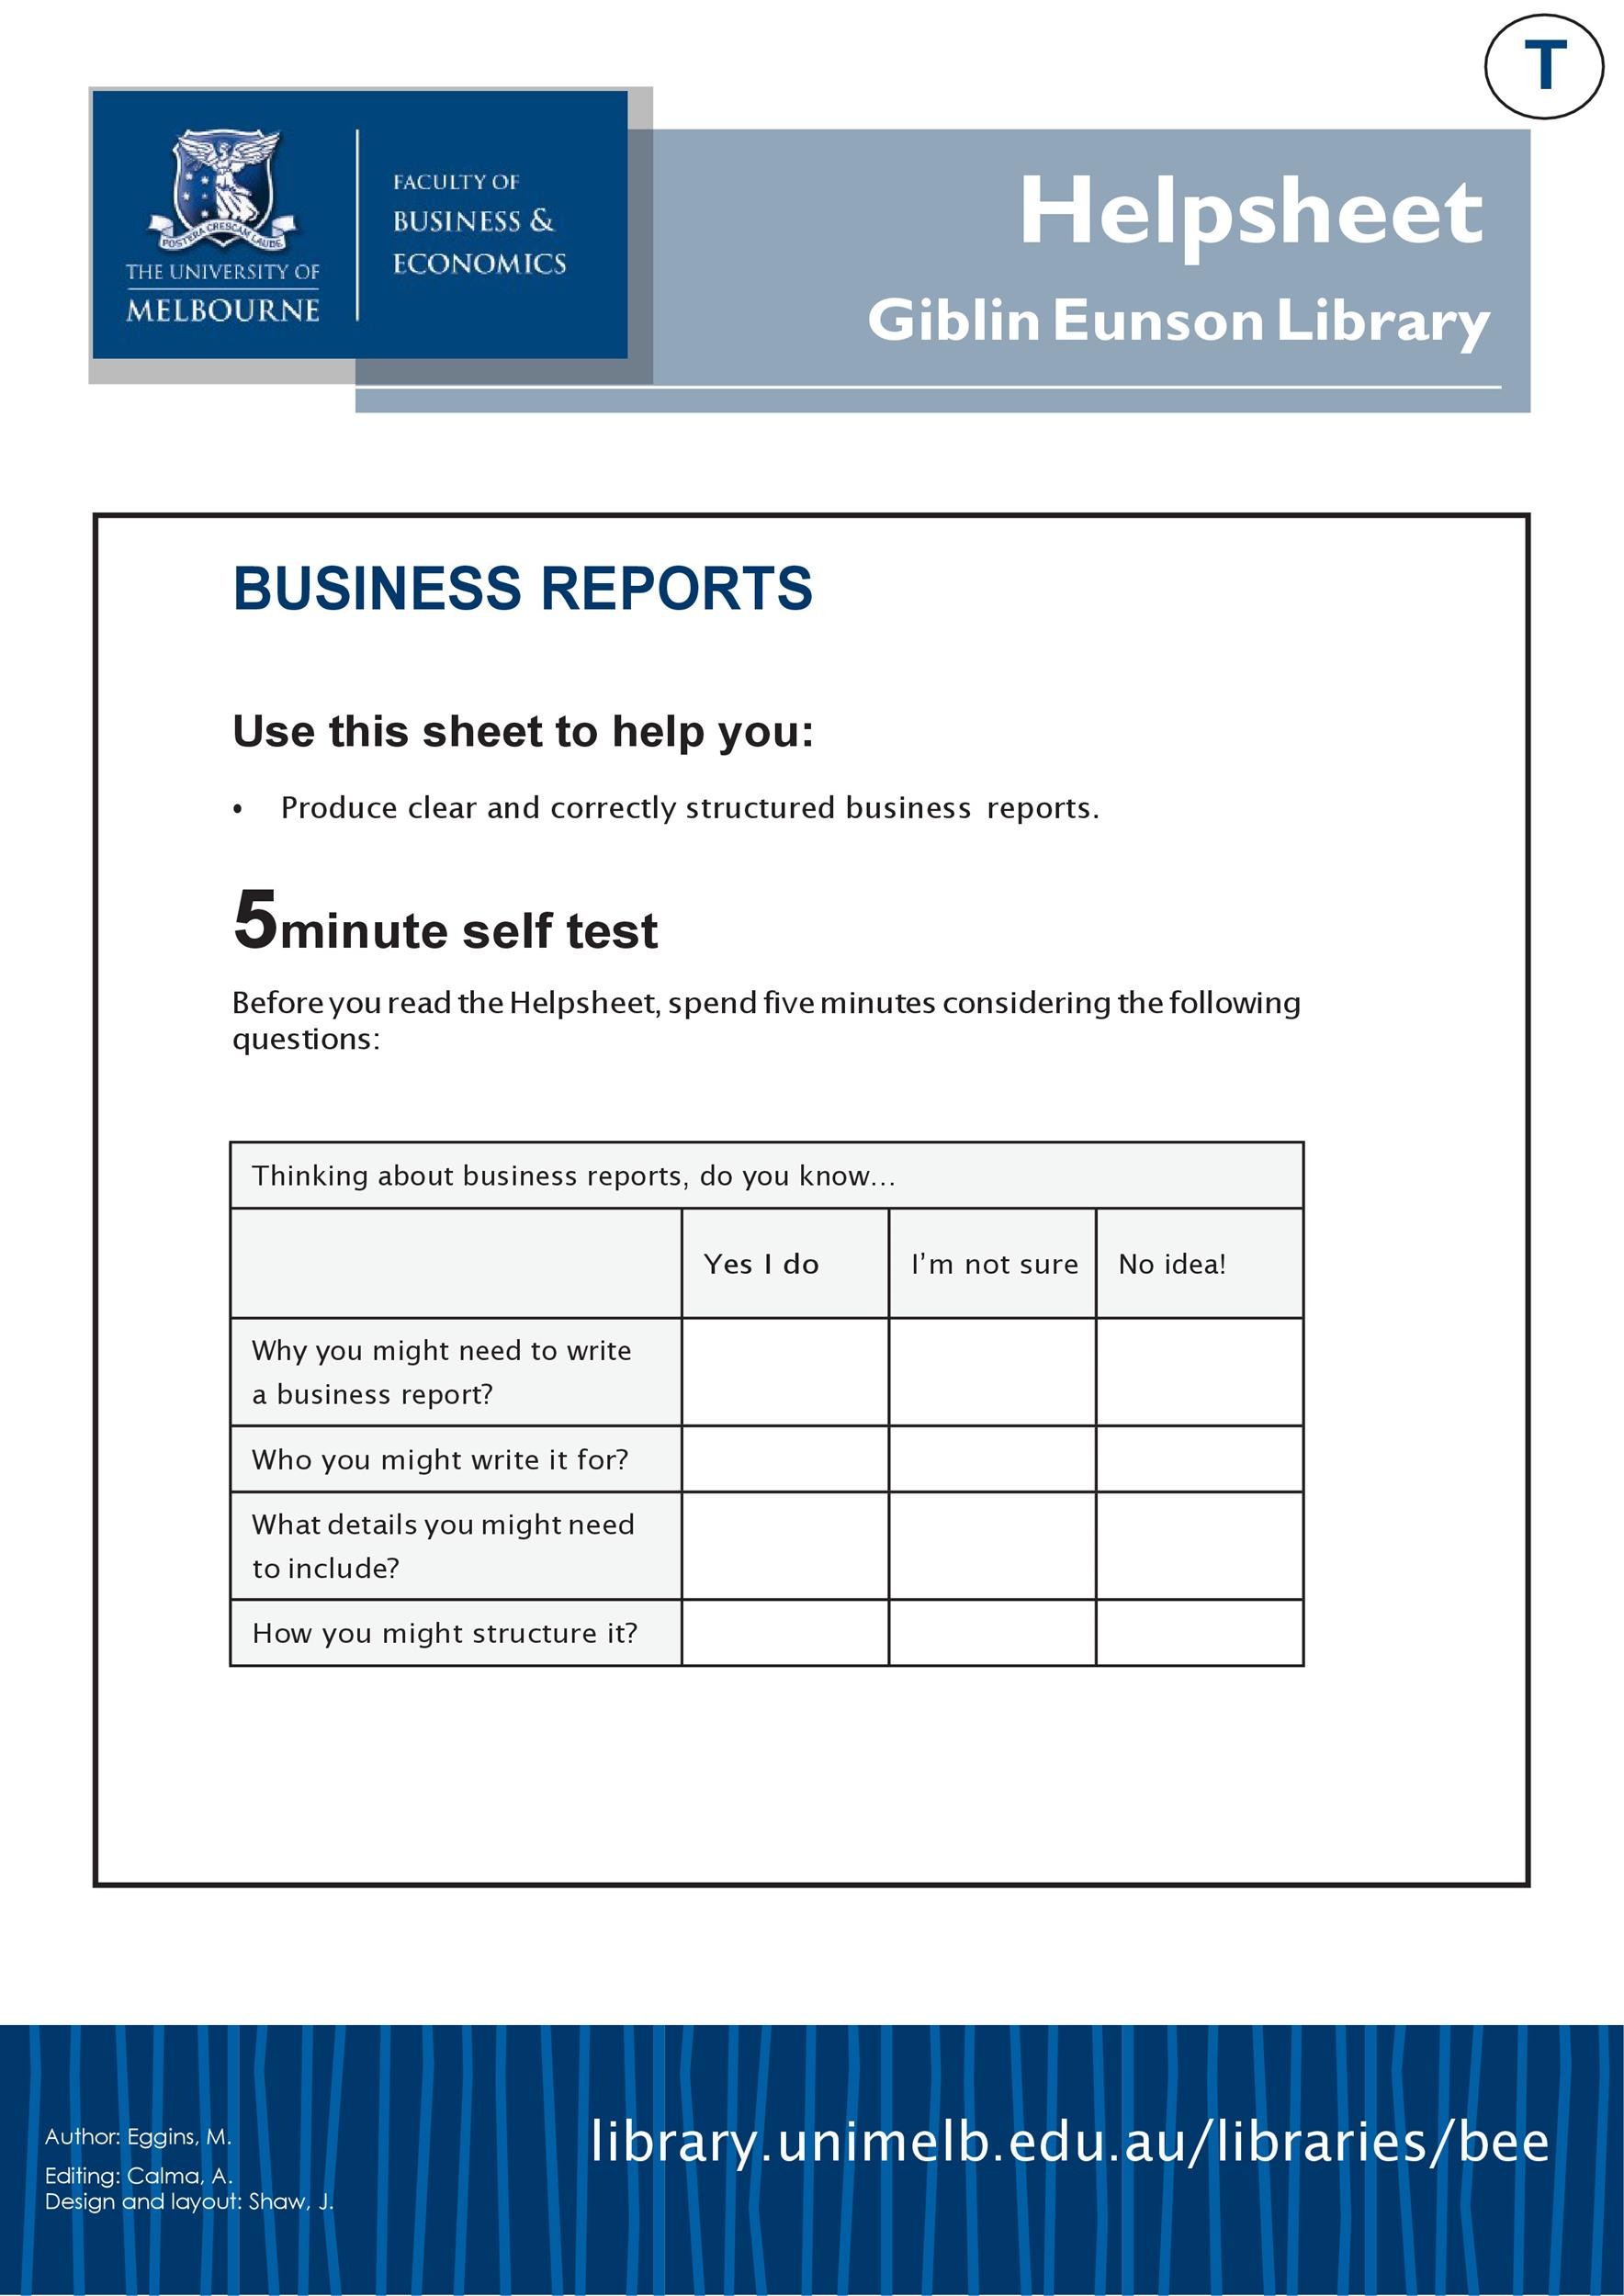 how to make project report sample business plan